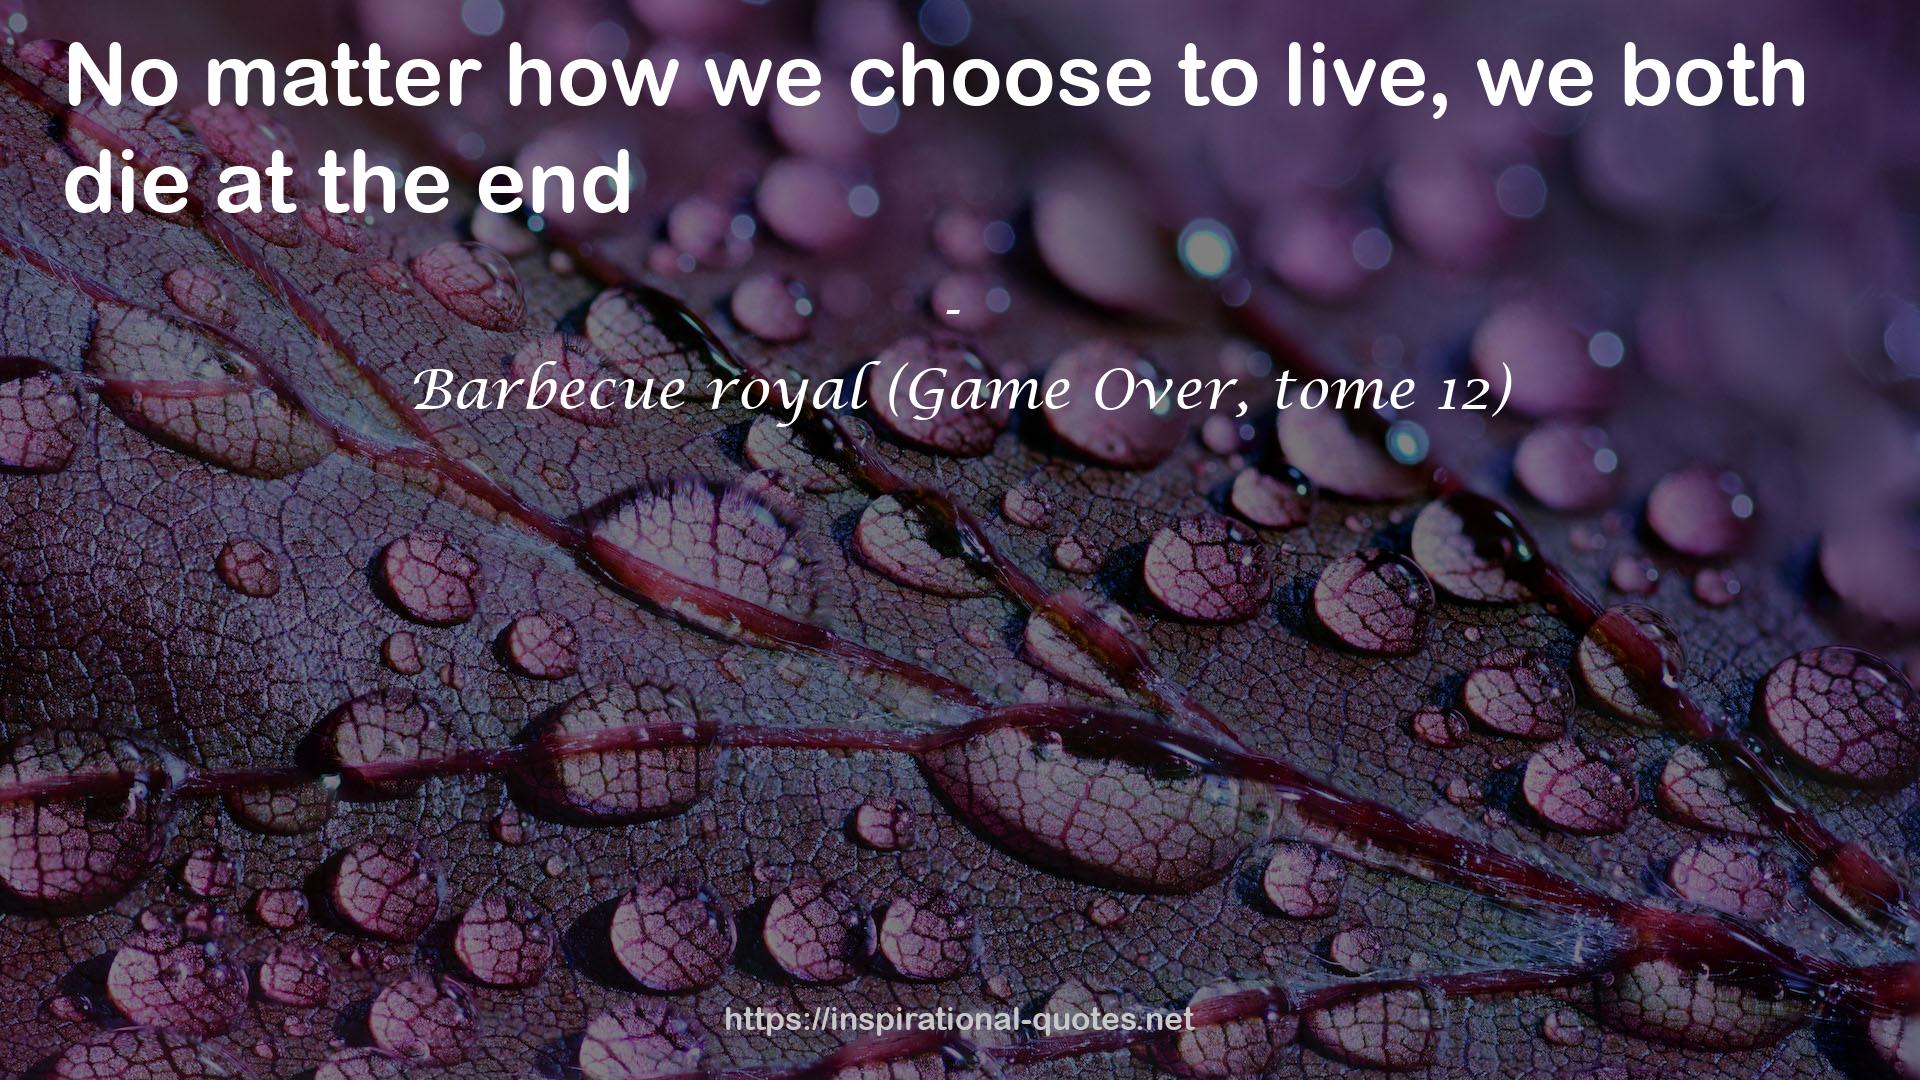 Barbecue royal (Game Over, tome 12) QUOTES